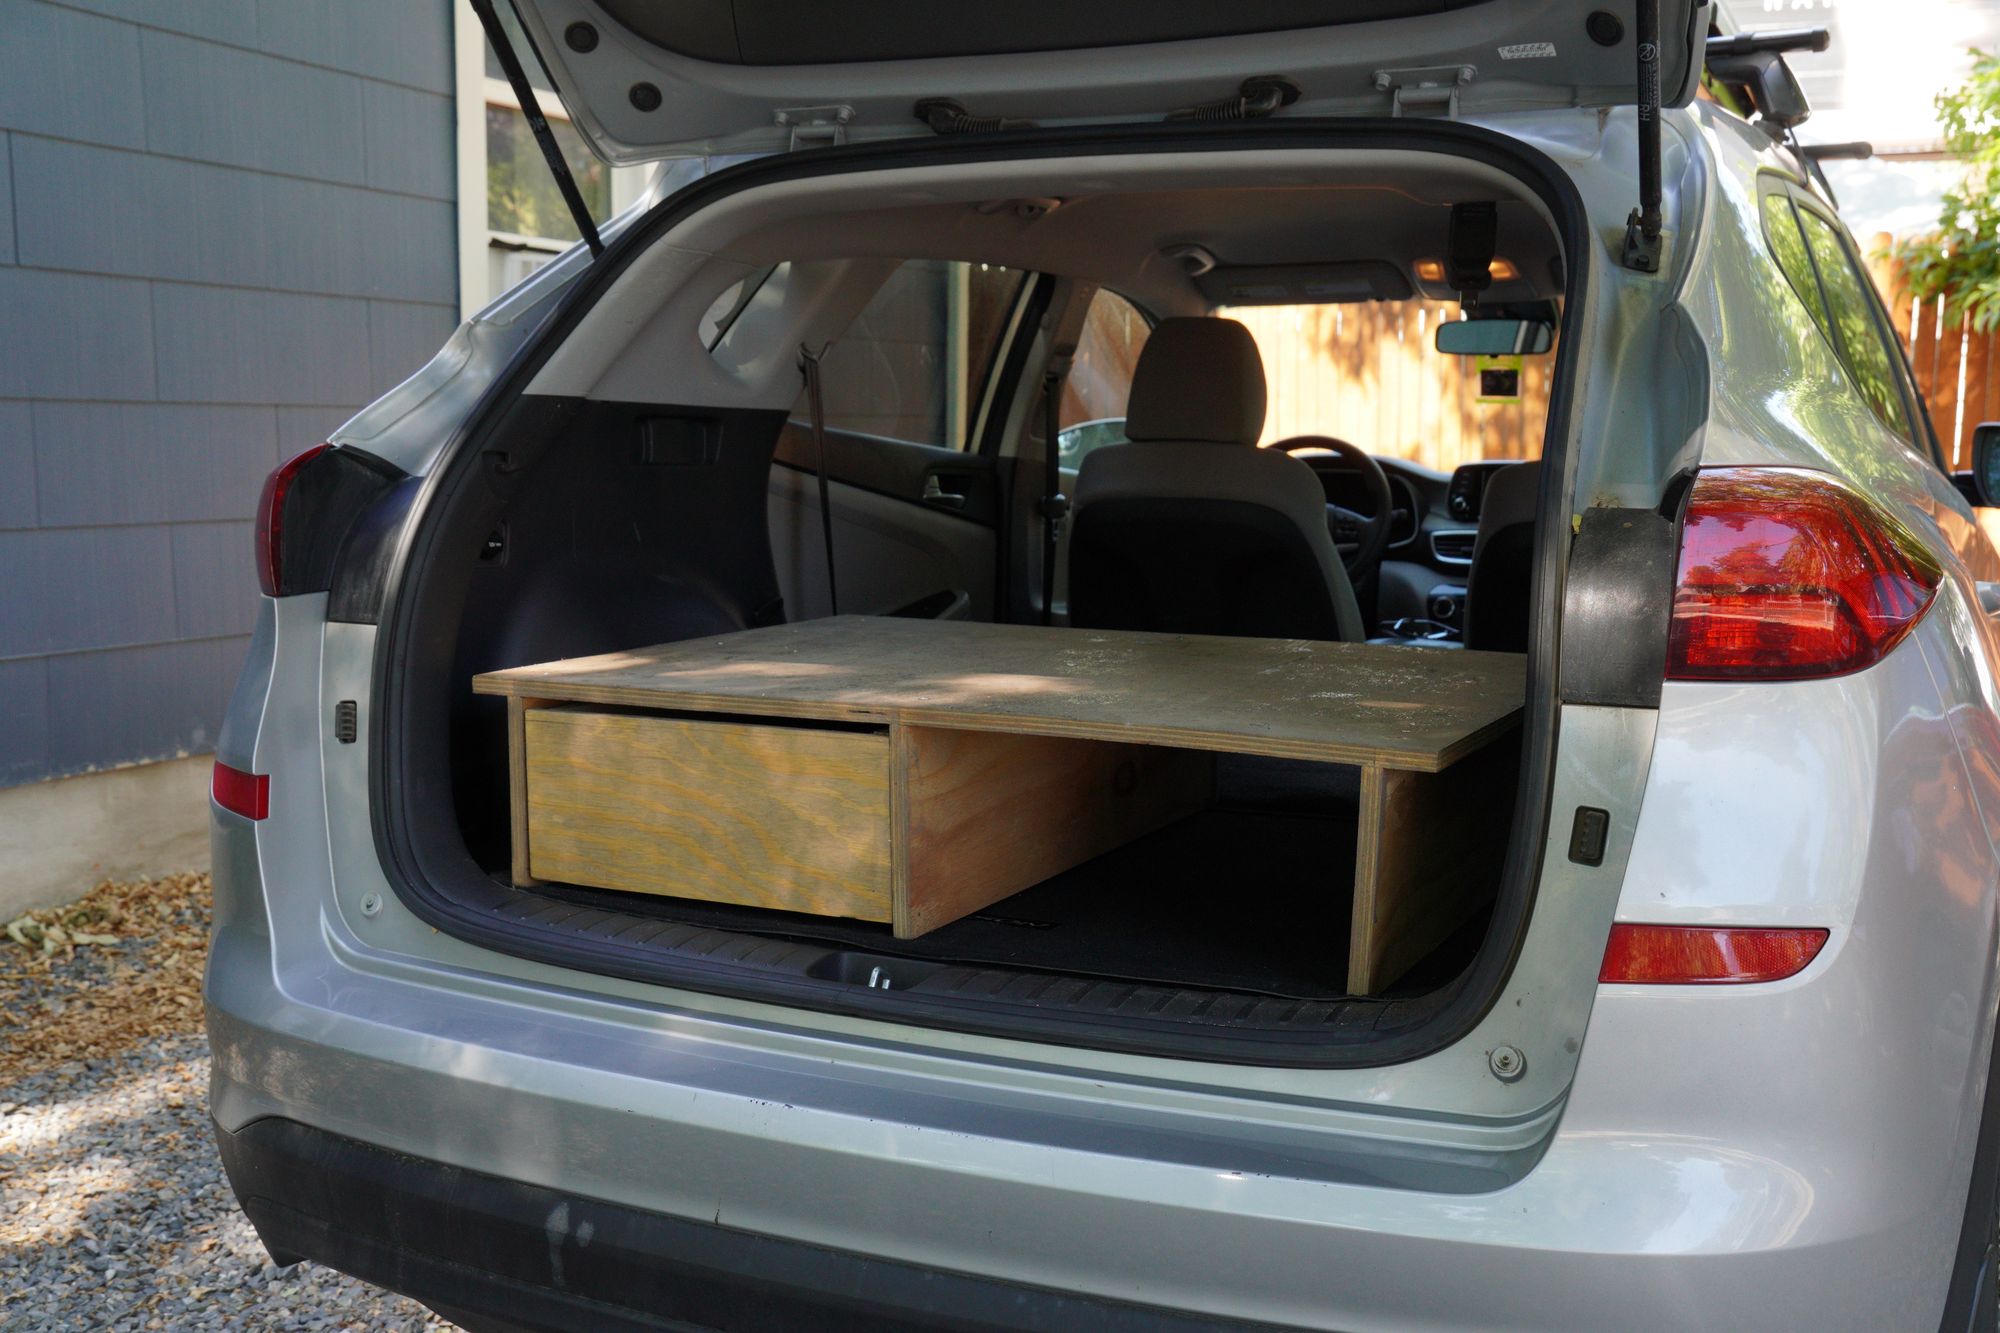 Building a drawer for my SUV car camping setup